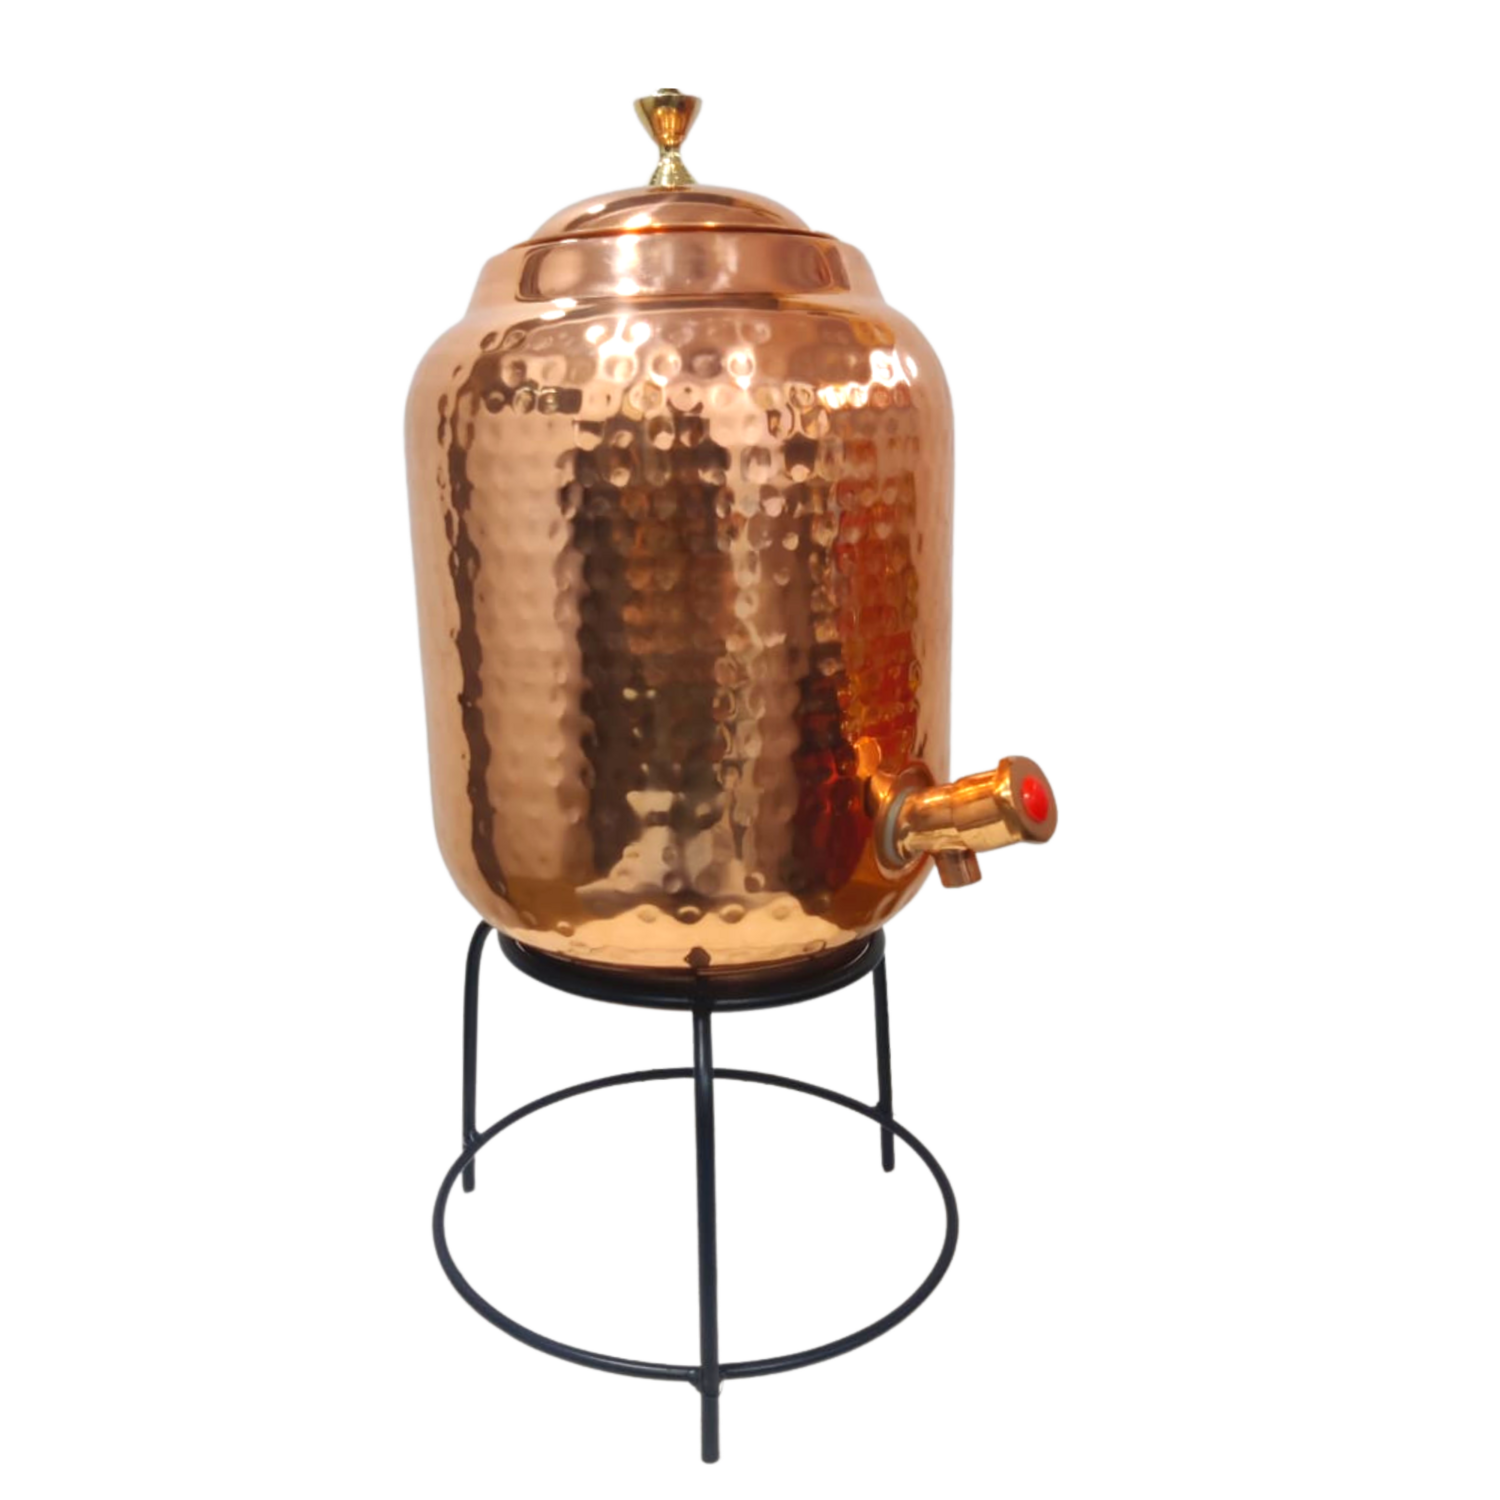 CopperKing Pure Copper Hammer Matka/ Pot 5Ltr With Stand